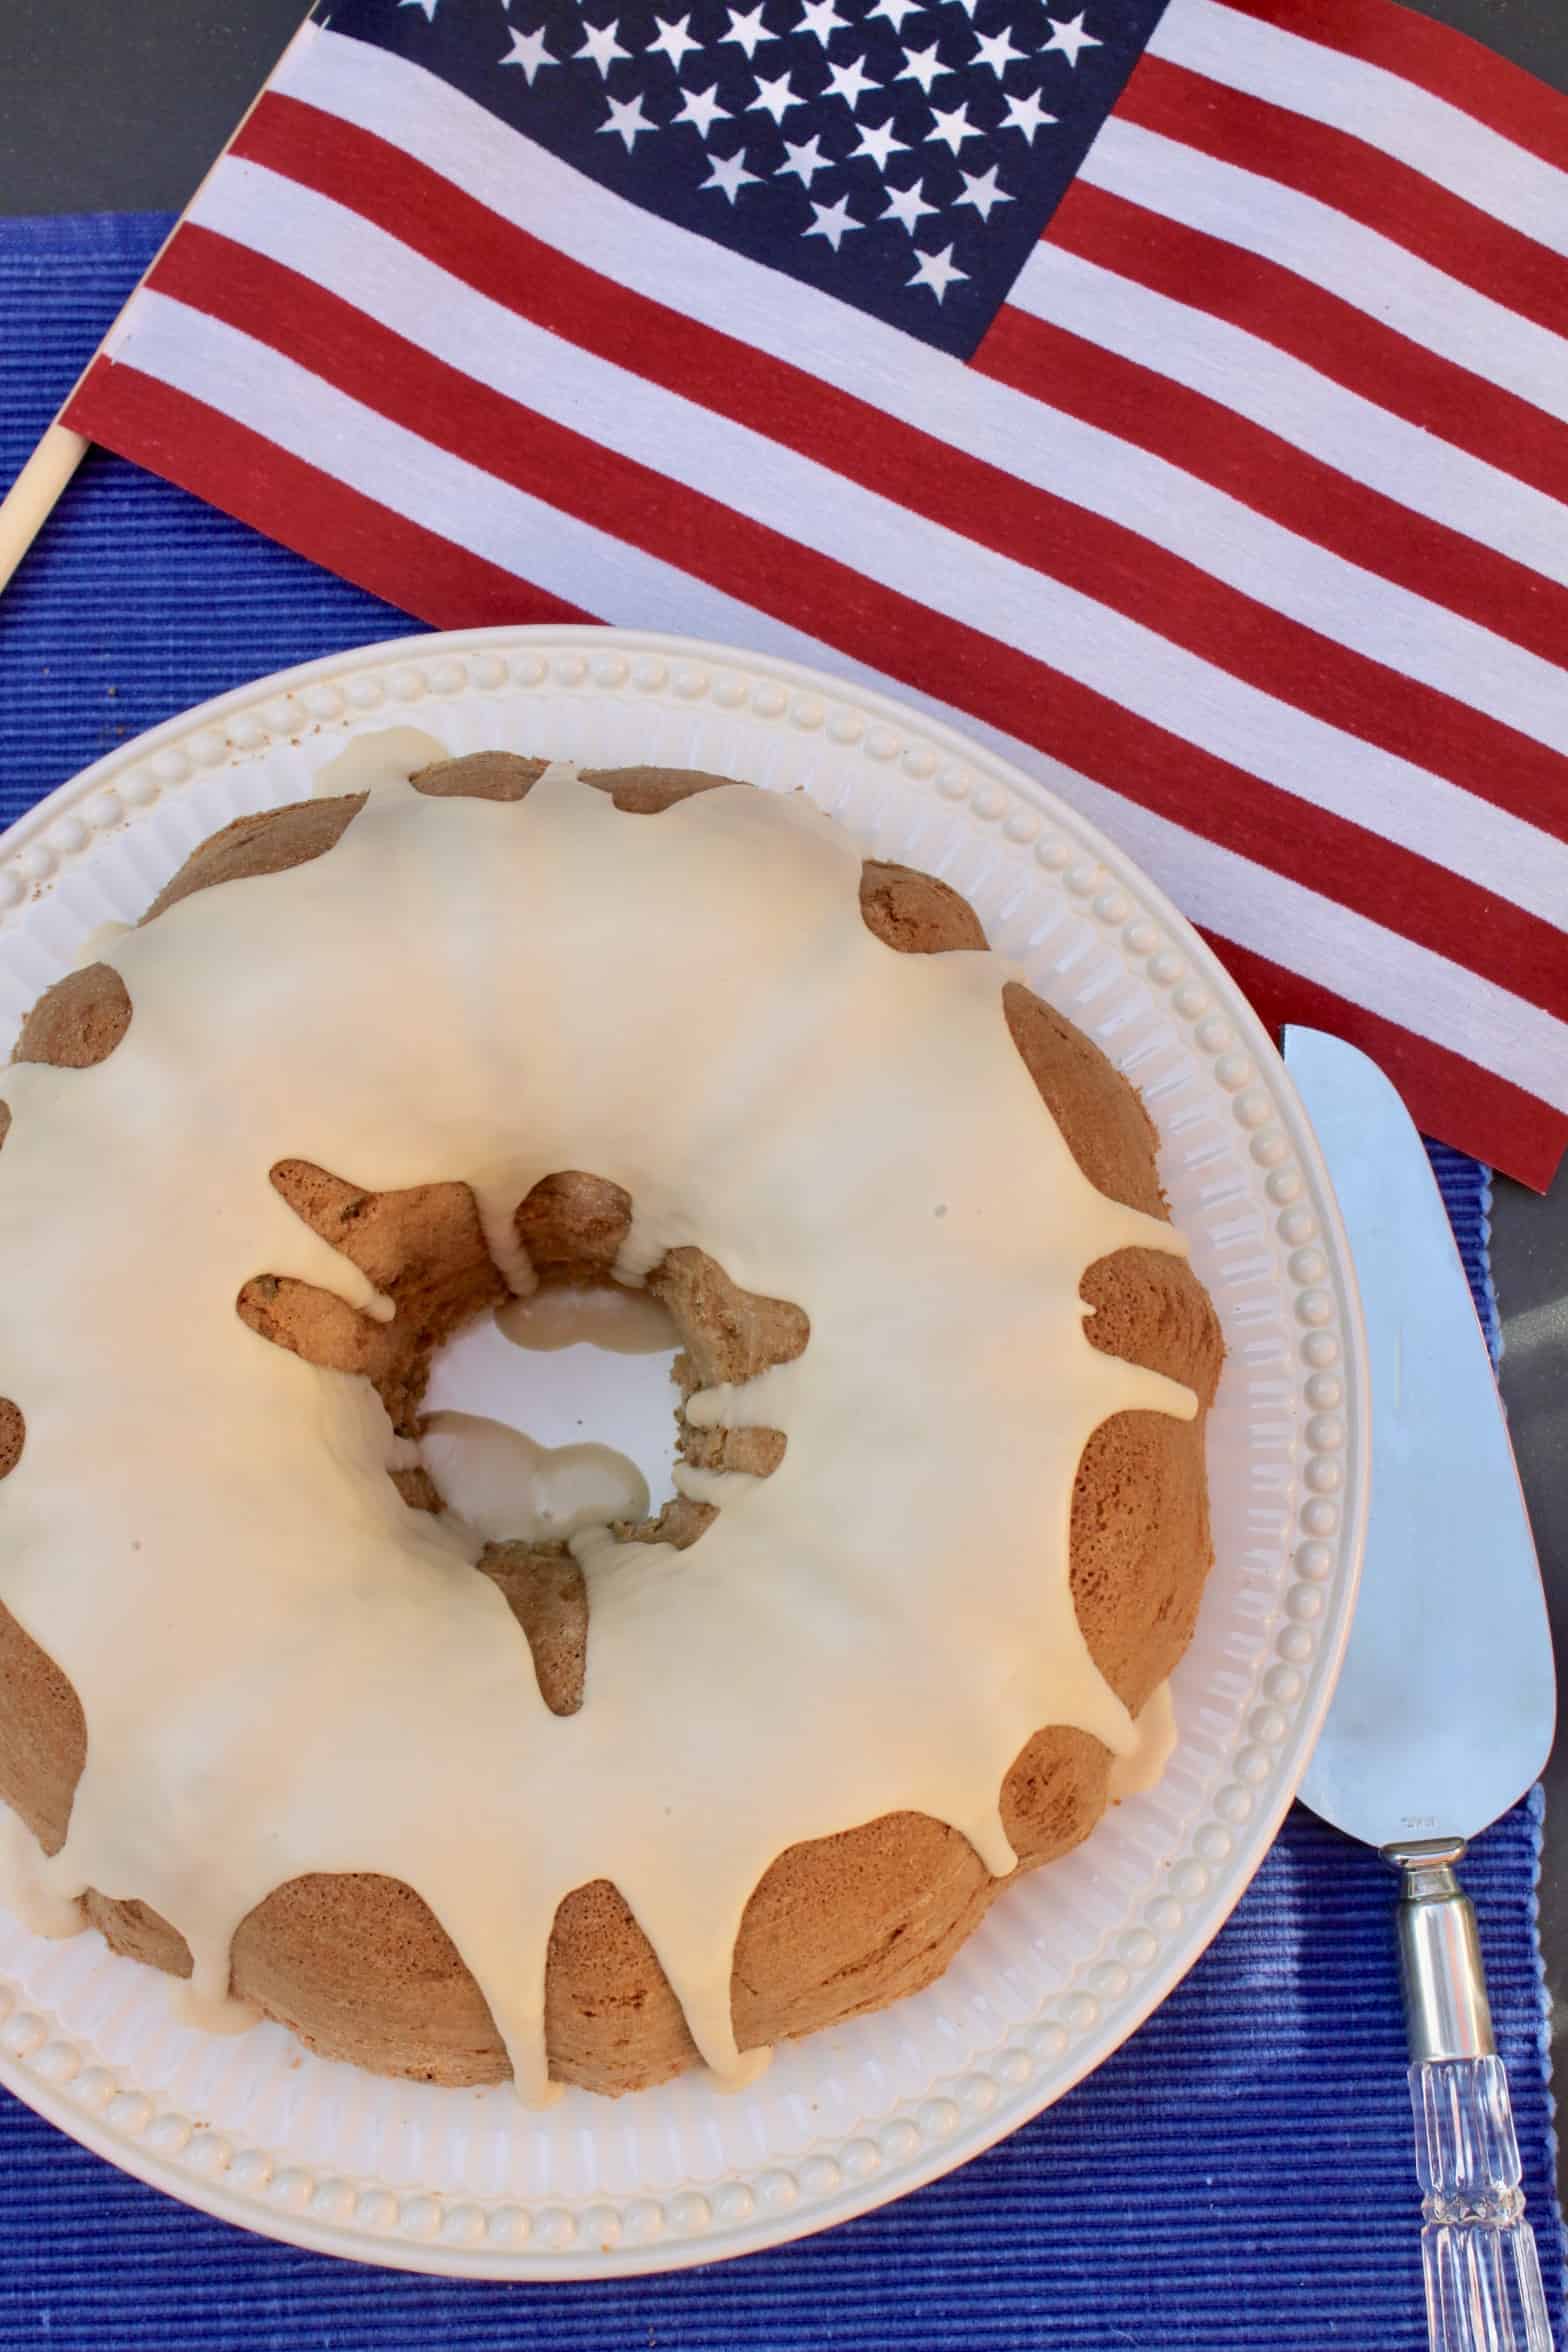 Election cake and US flag